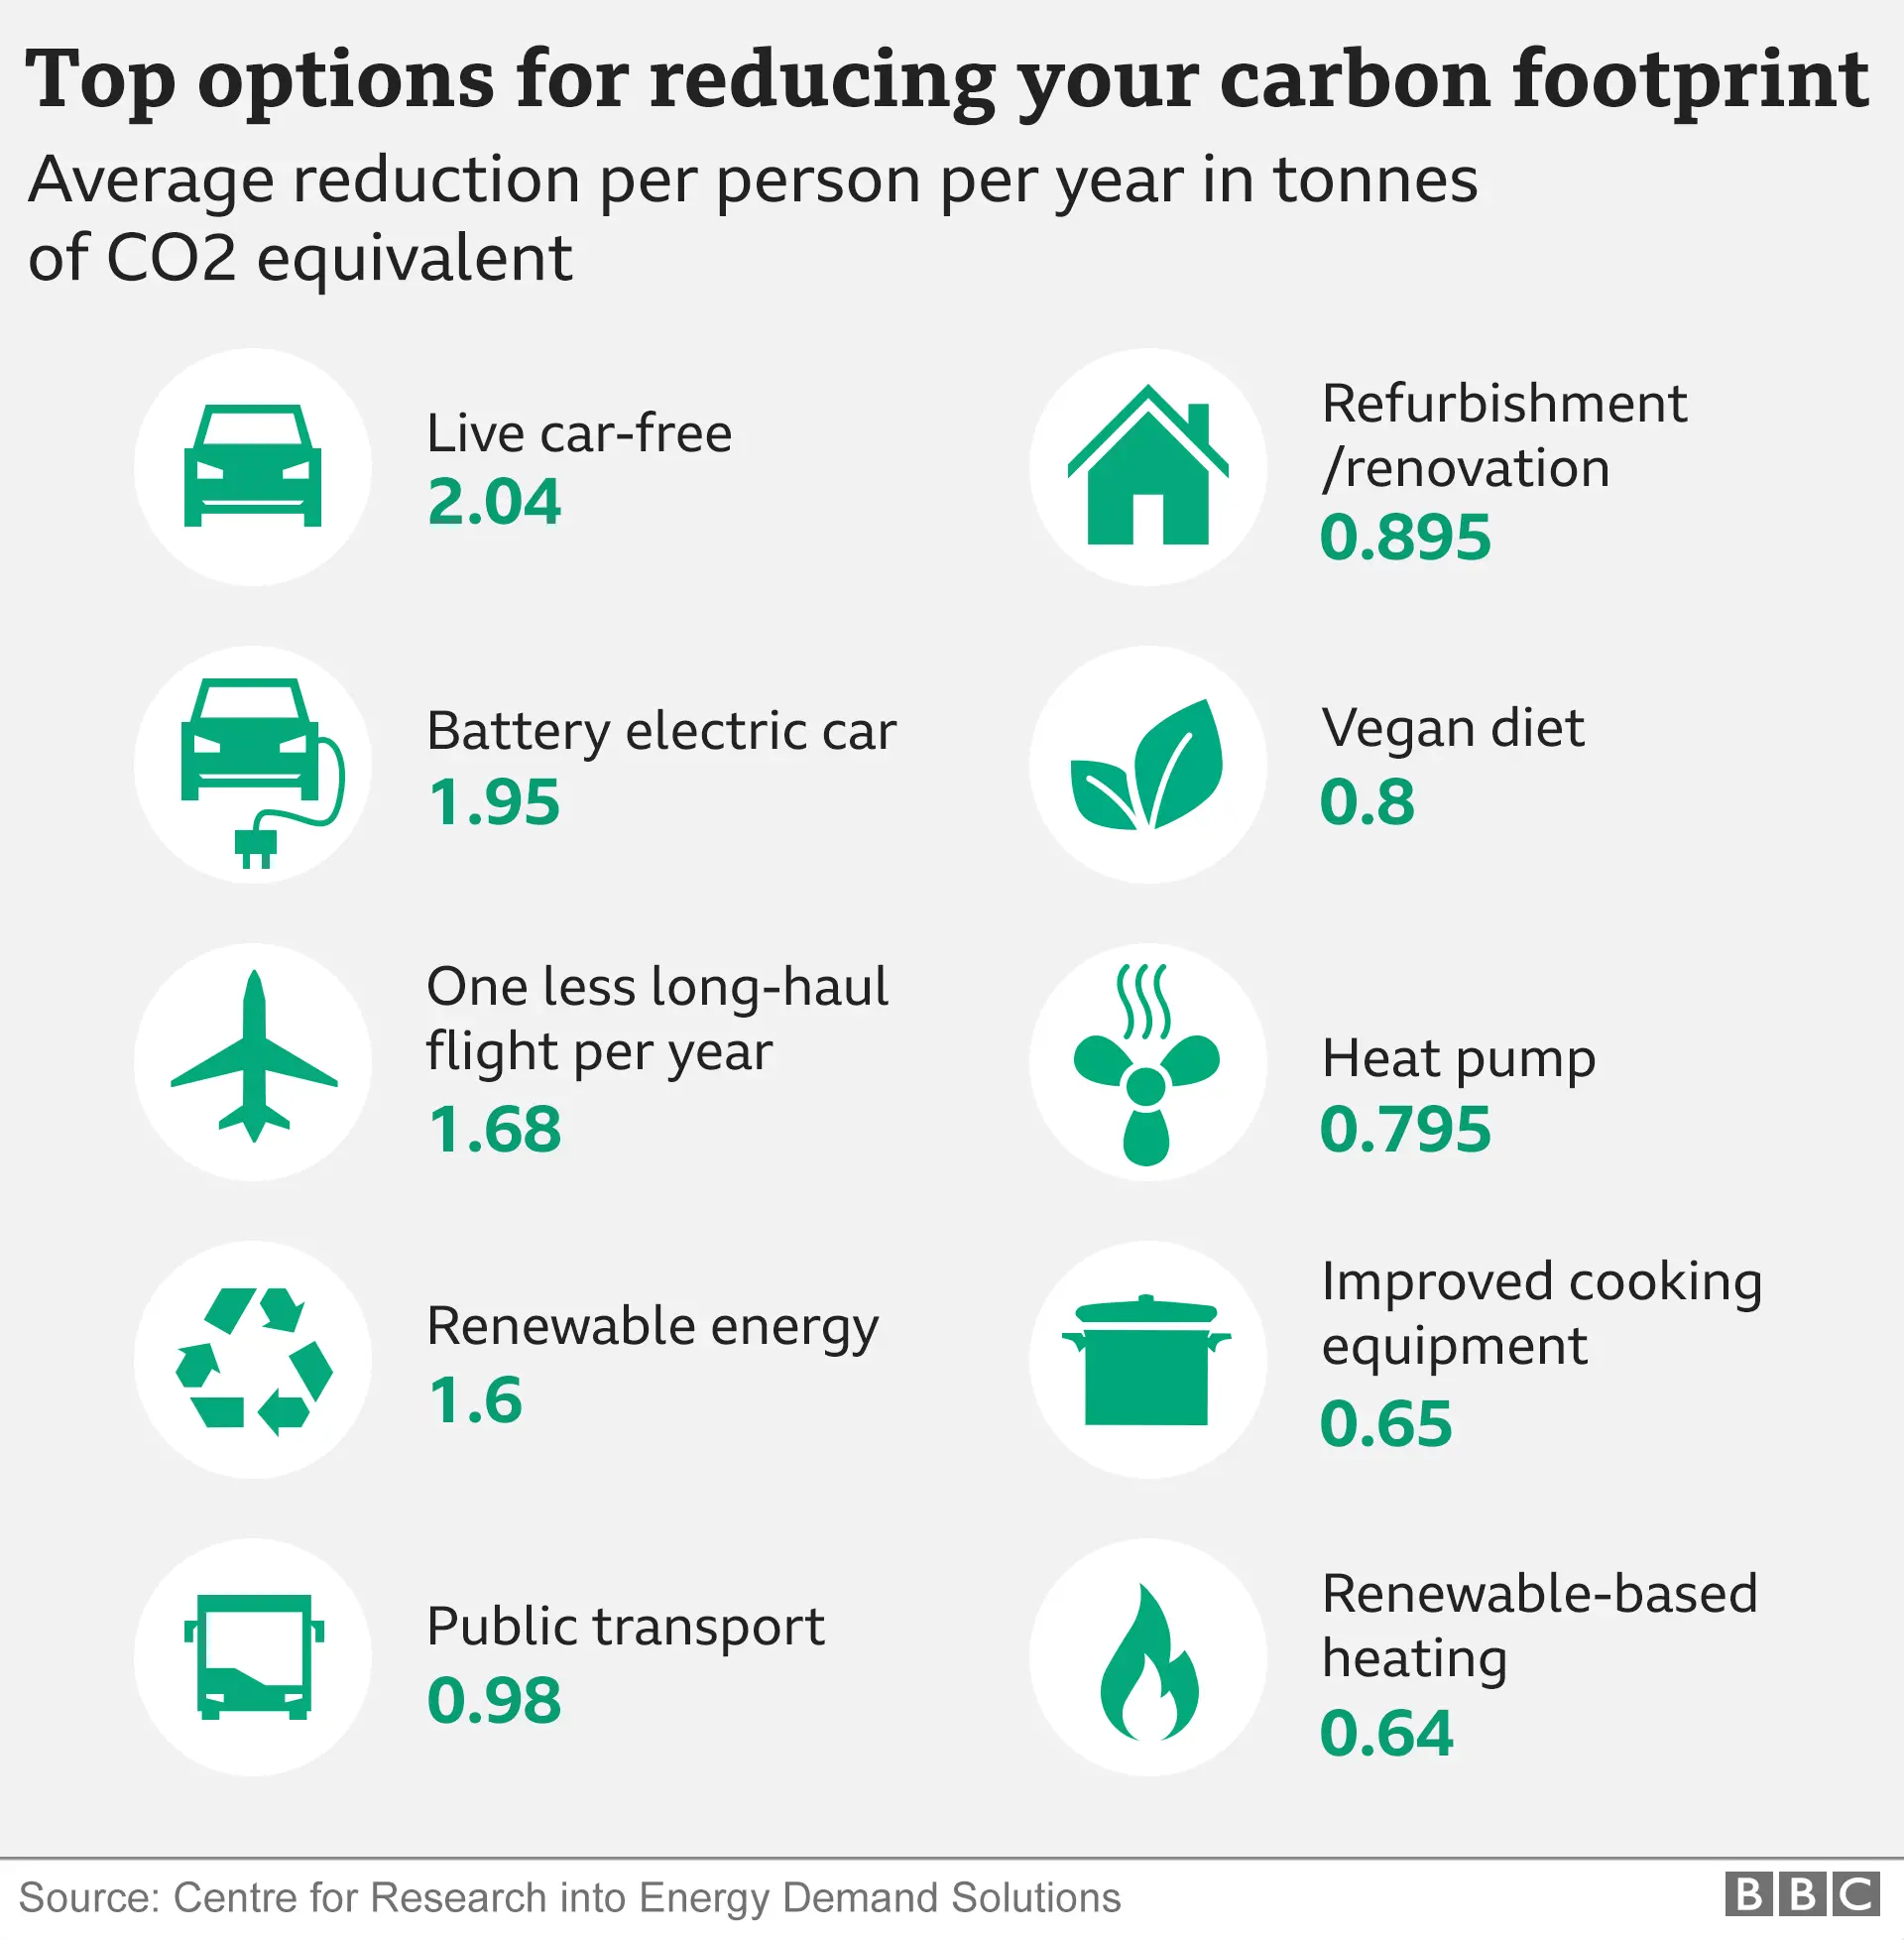 10 easy ways to reduce your carbon footprint - ISRAEL21c